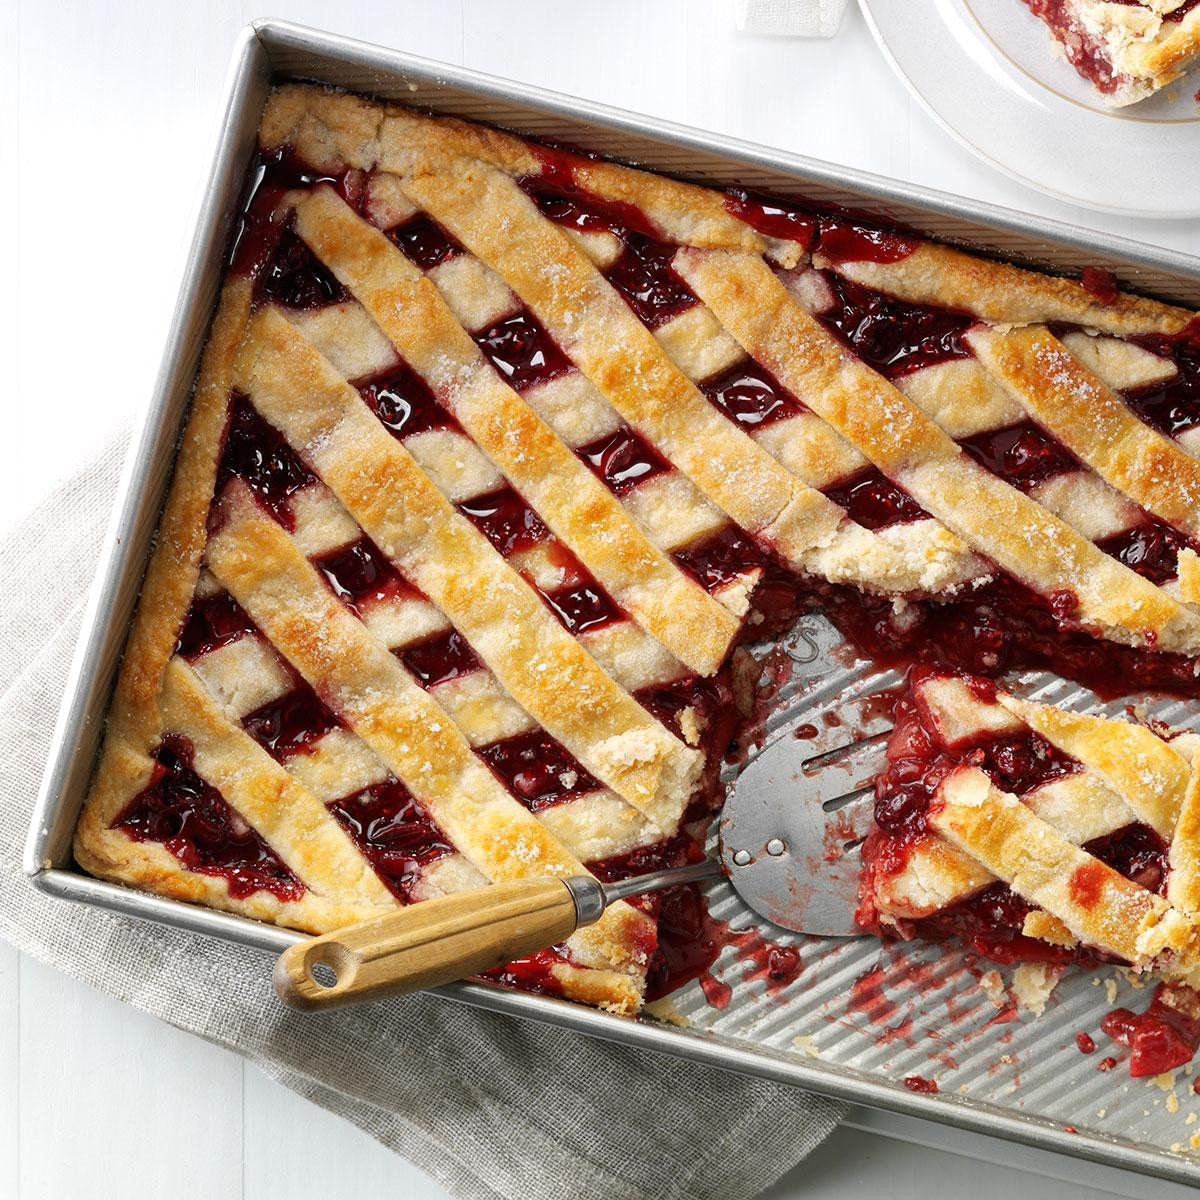 4 Thanksgiving Pies On One Sheet Tray
 Apple Cranberry Slab Pie Recipe